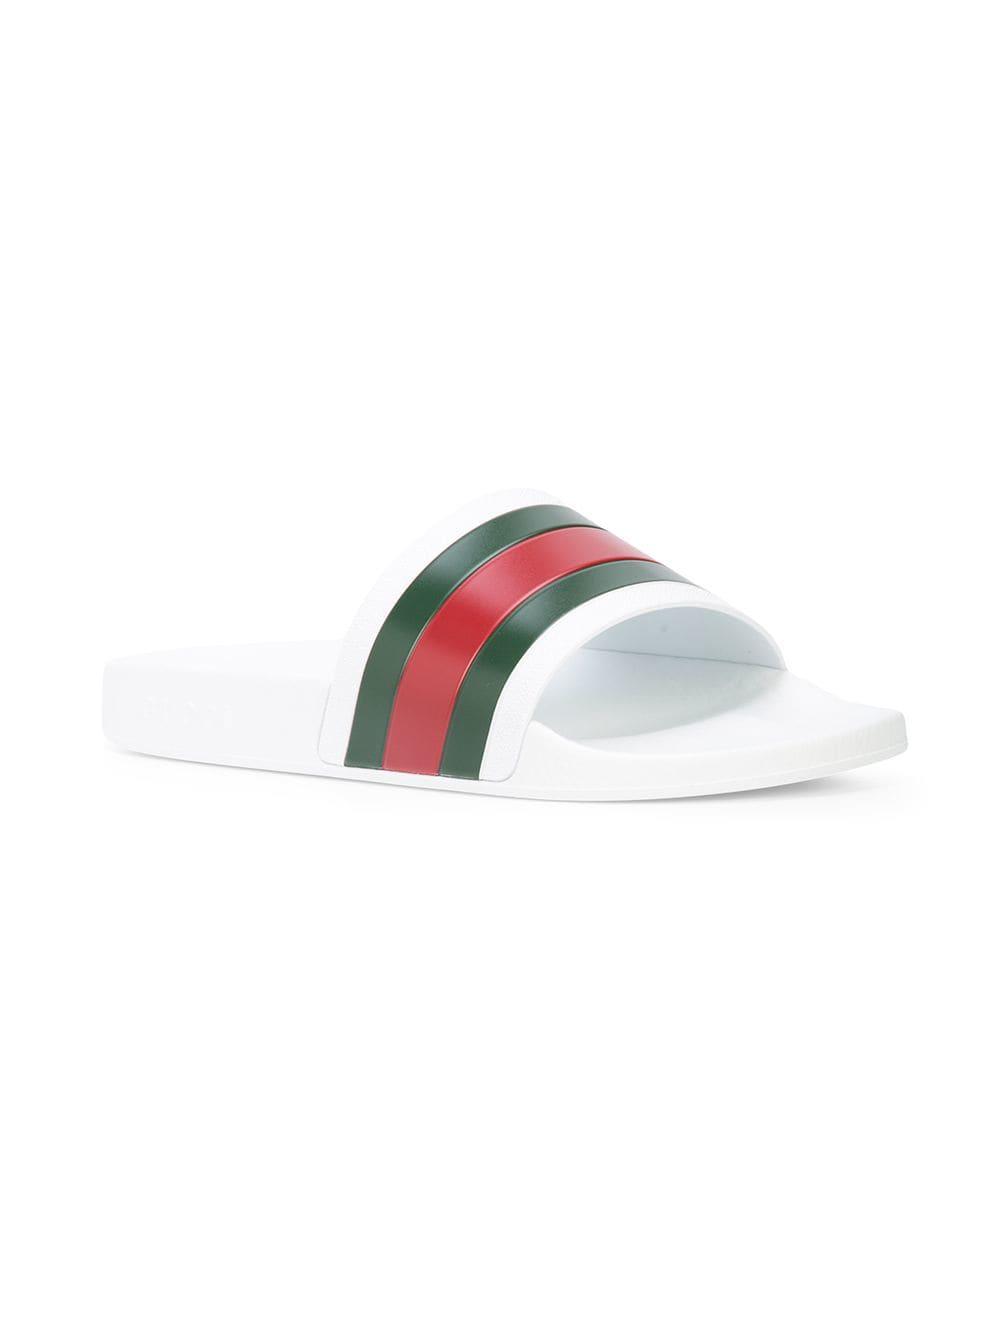 all white gucci slides, OFF 70%,www 